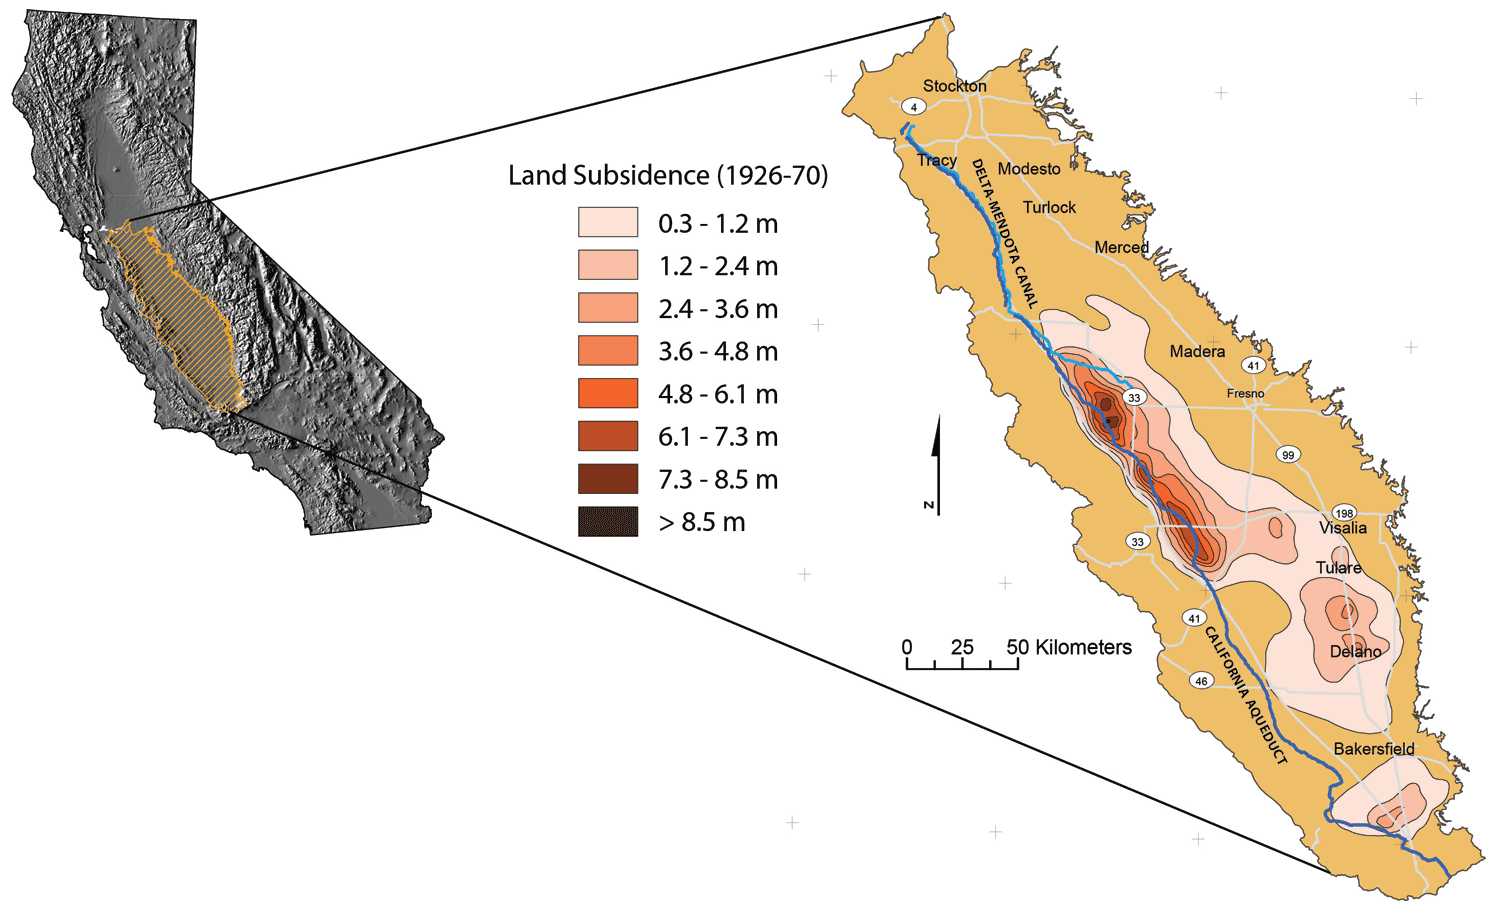 Map showing land subsidence in the San Joaquin Valley, California, 1926-70 (modified from Ireland and others, 1984)